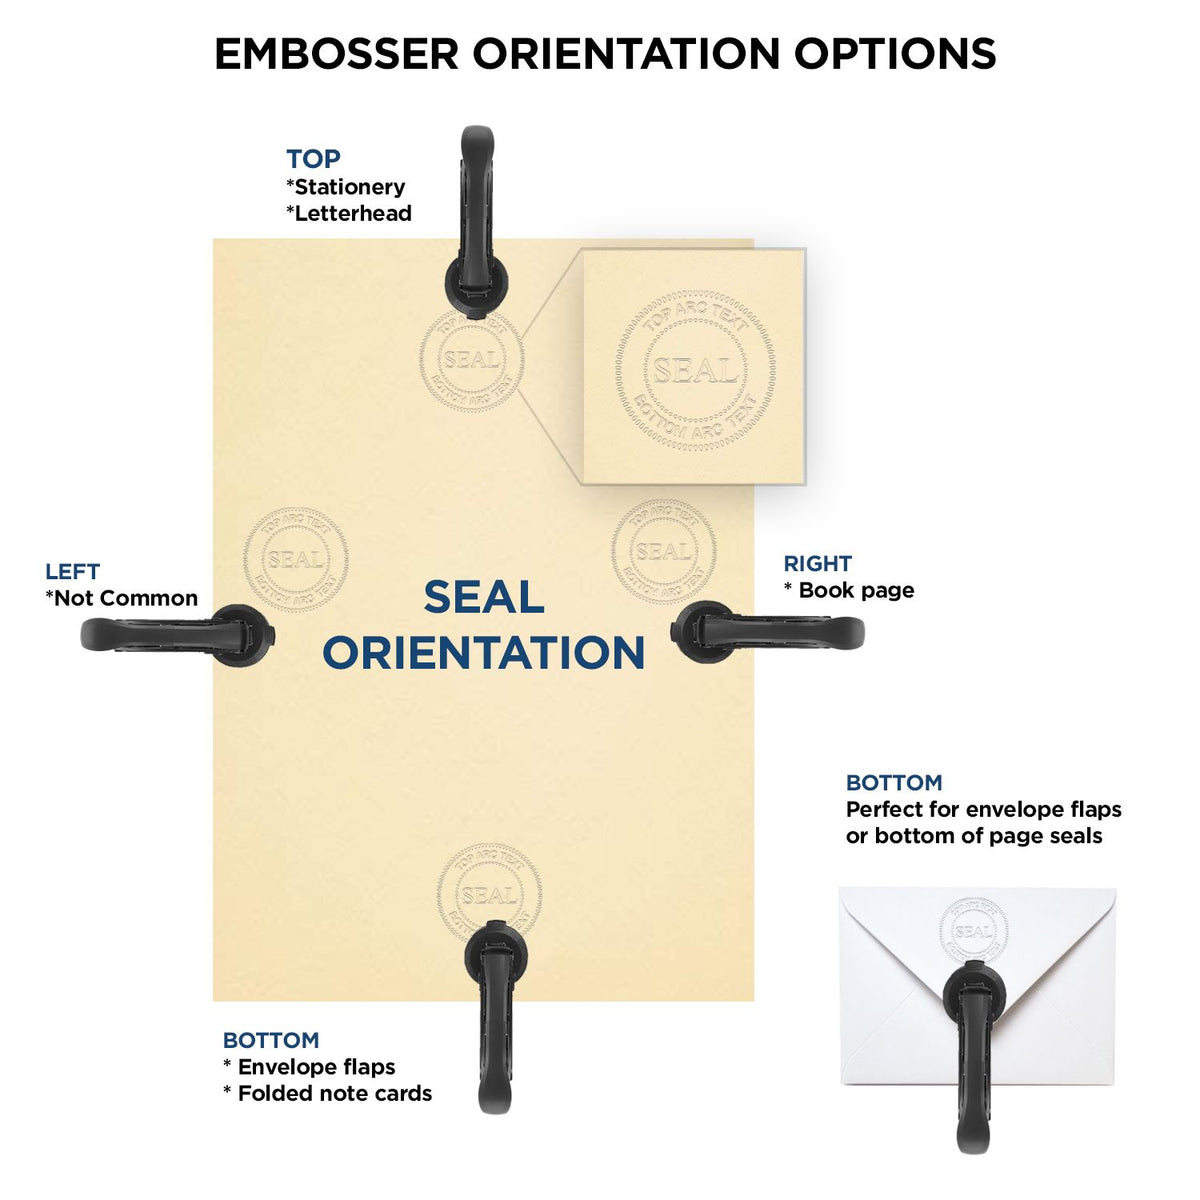 An infographic for the Handheld Pennsylvania Architect Seal Embosser showing embosser orientation, this is showing examples of a top, bottom, right and left insert.